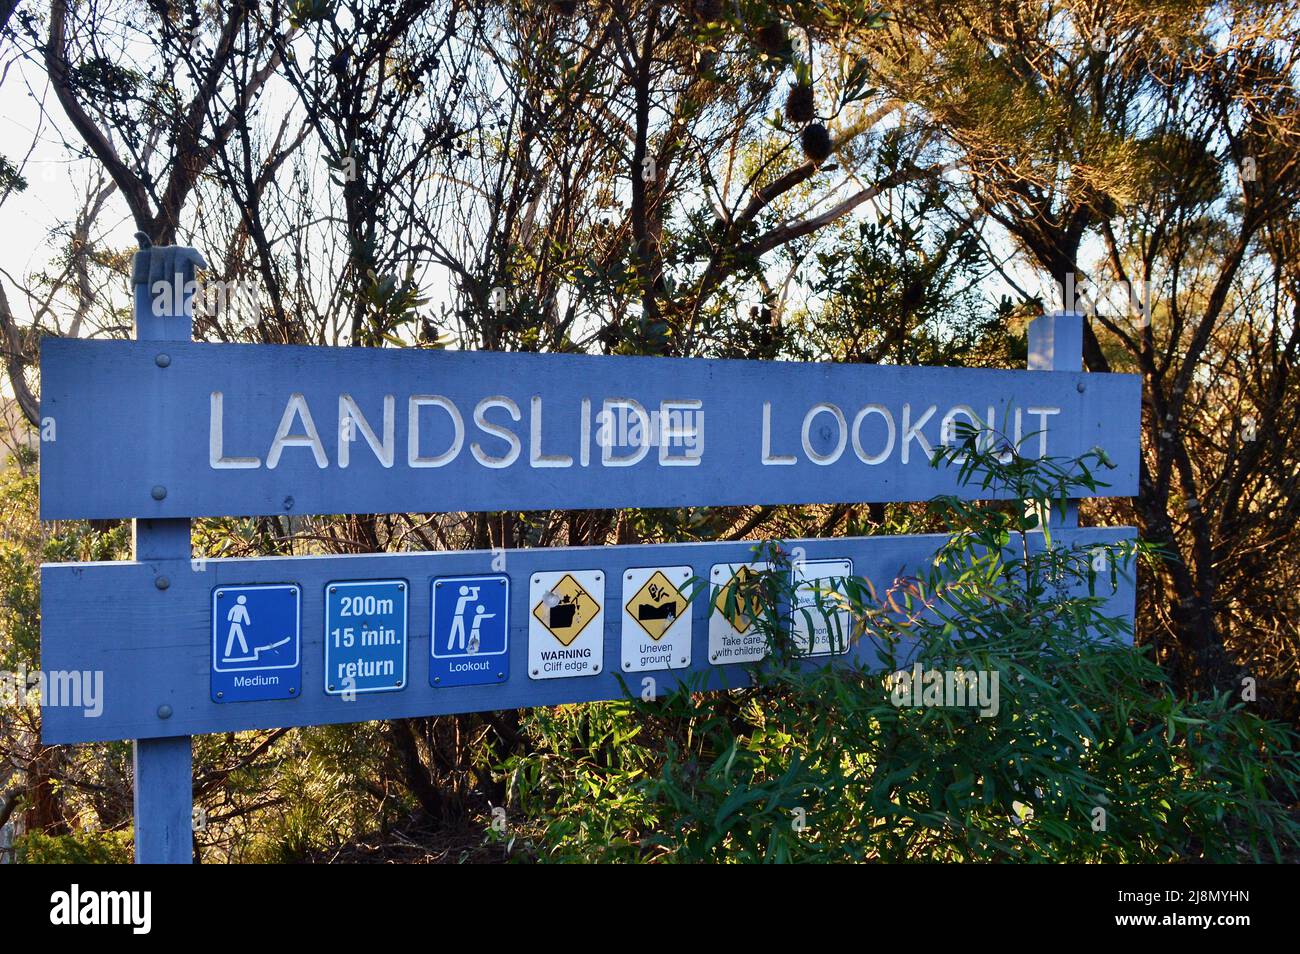 Landslide lookout at Katoomba in the Blue Mountains of Australia Stock Photo